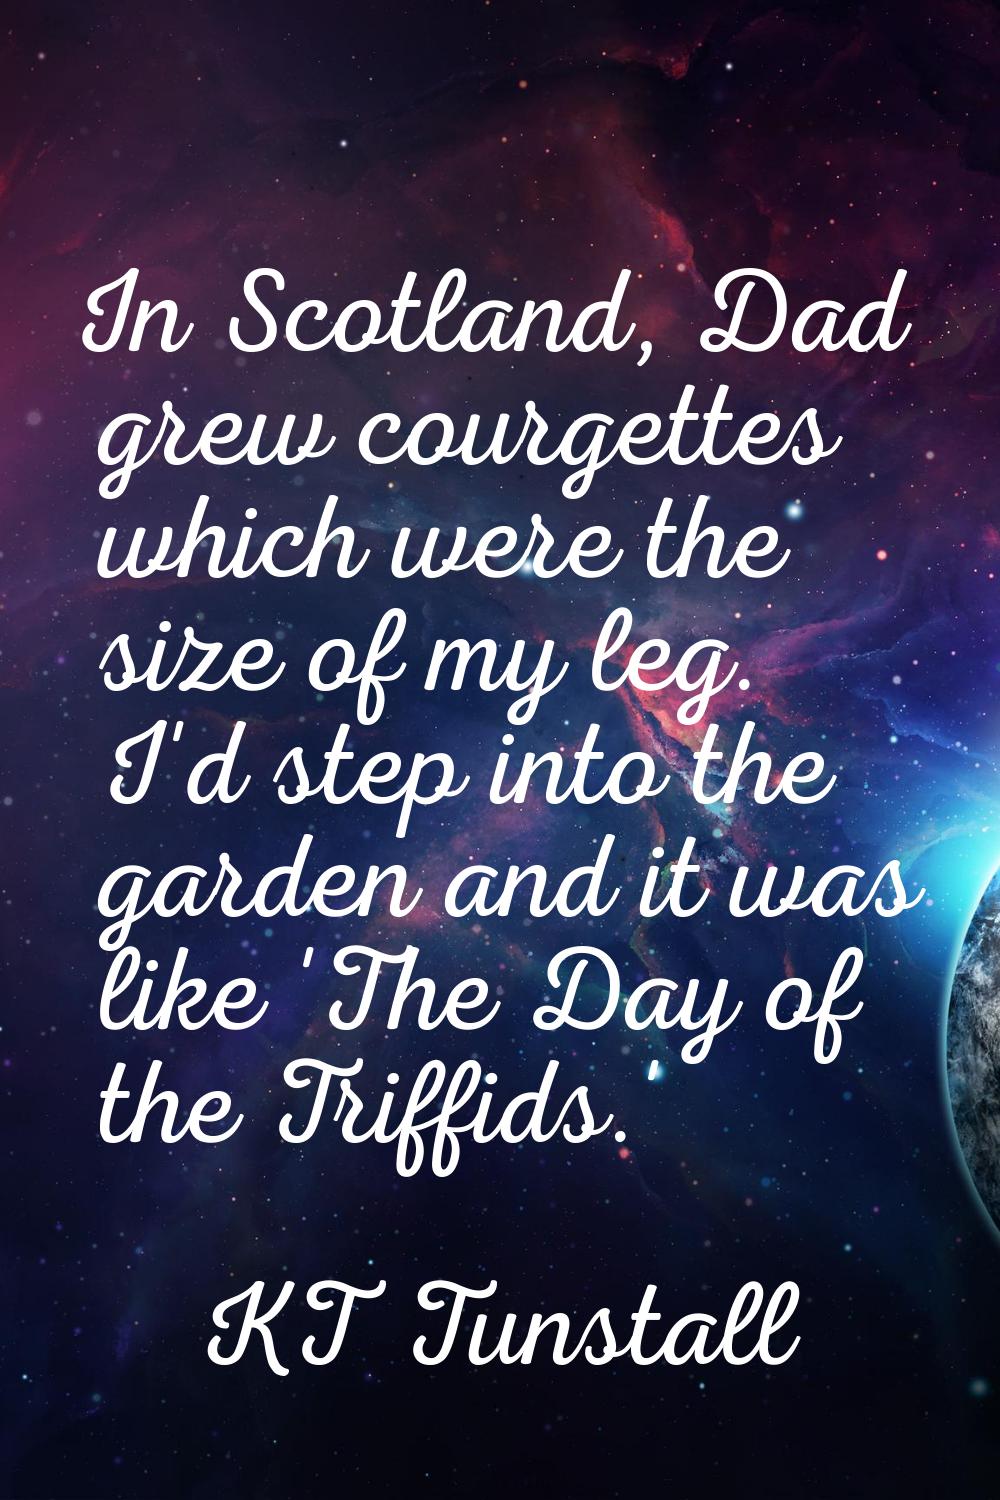 In Scotland, Dad grew courgettes which were the size of my leg. I'd step into the garden and it was